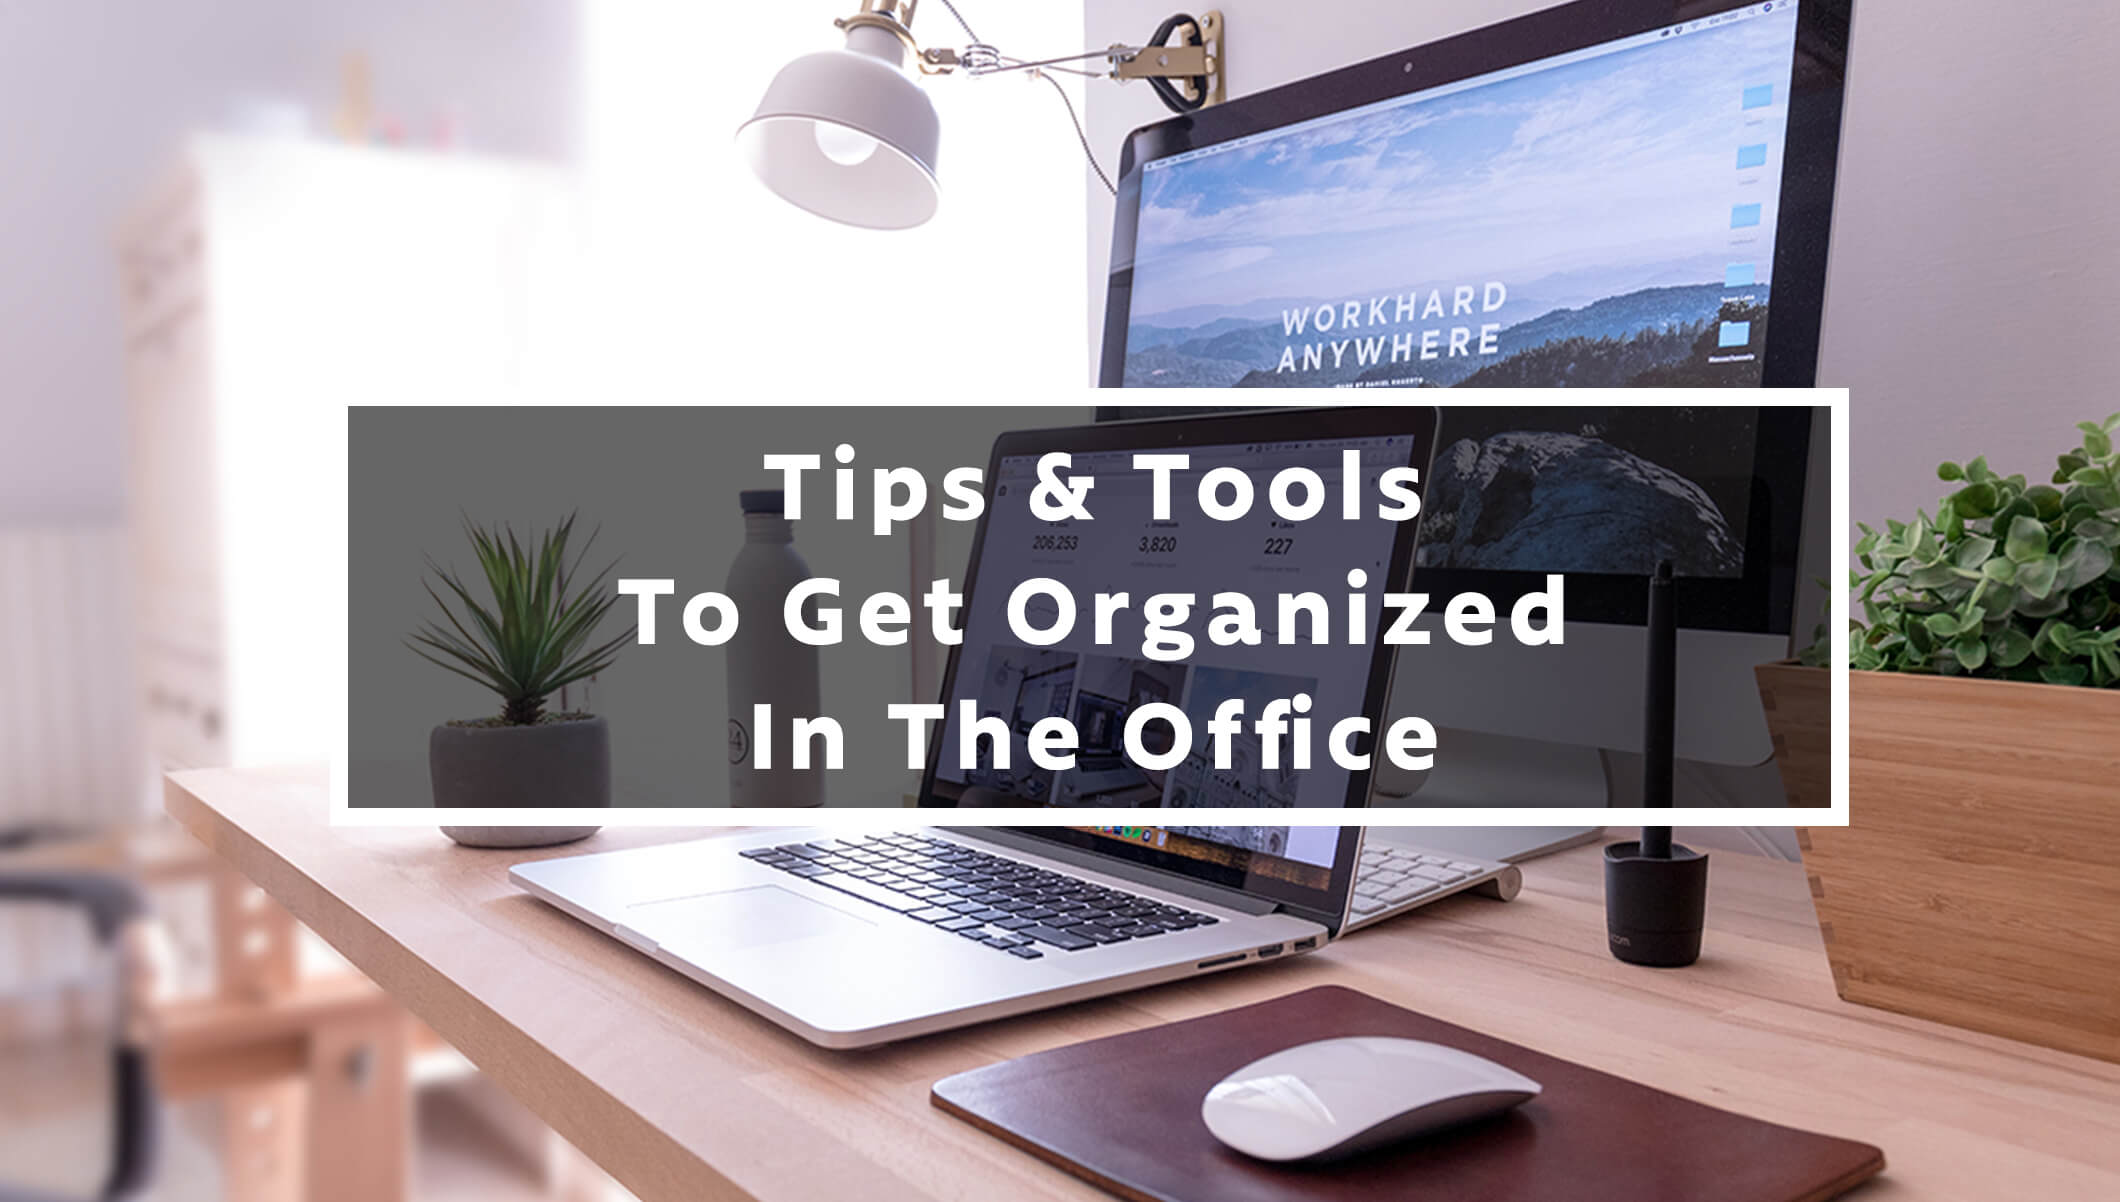 Tips & Tools to Get Organized In The Office